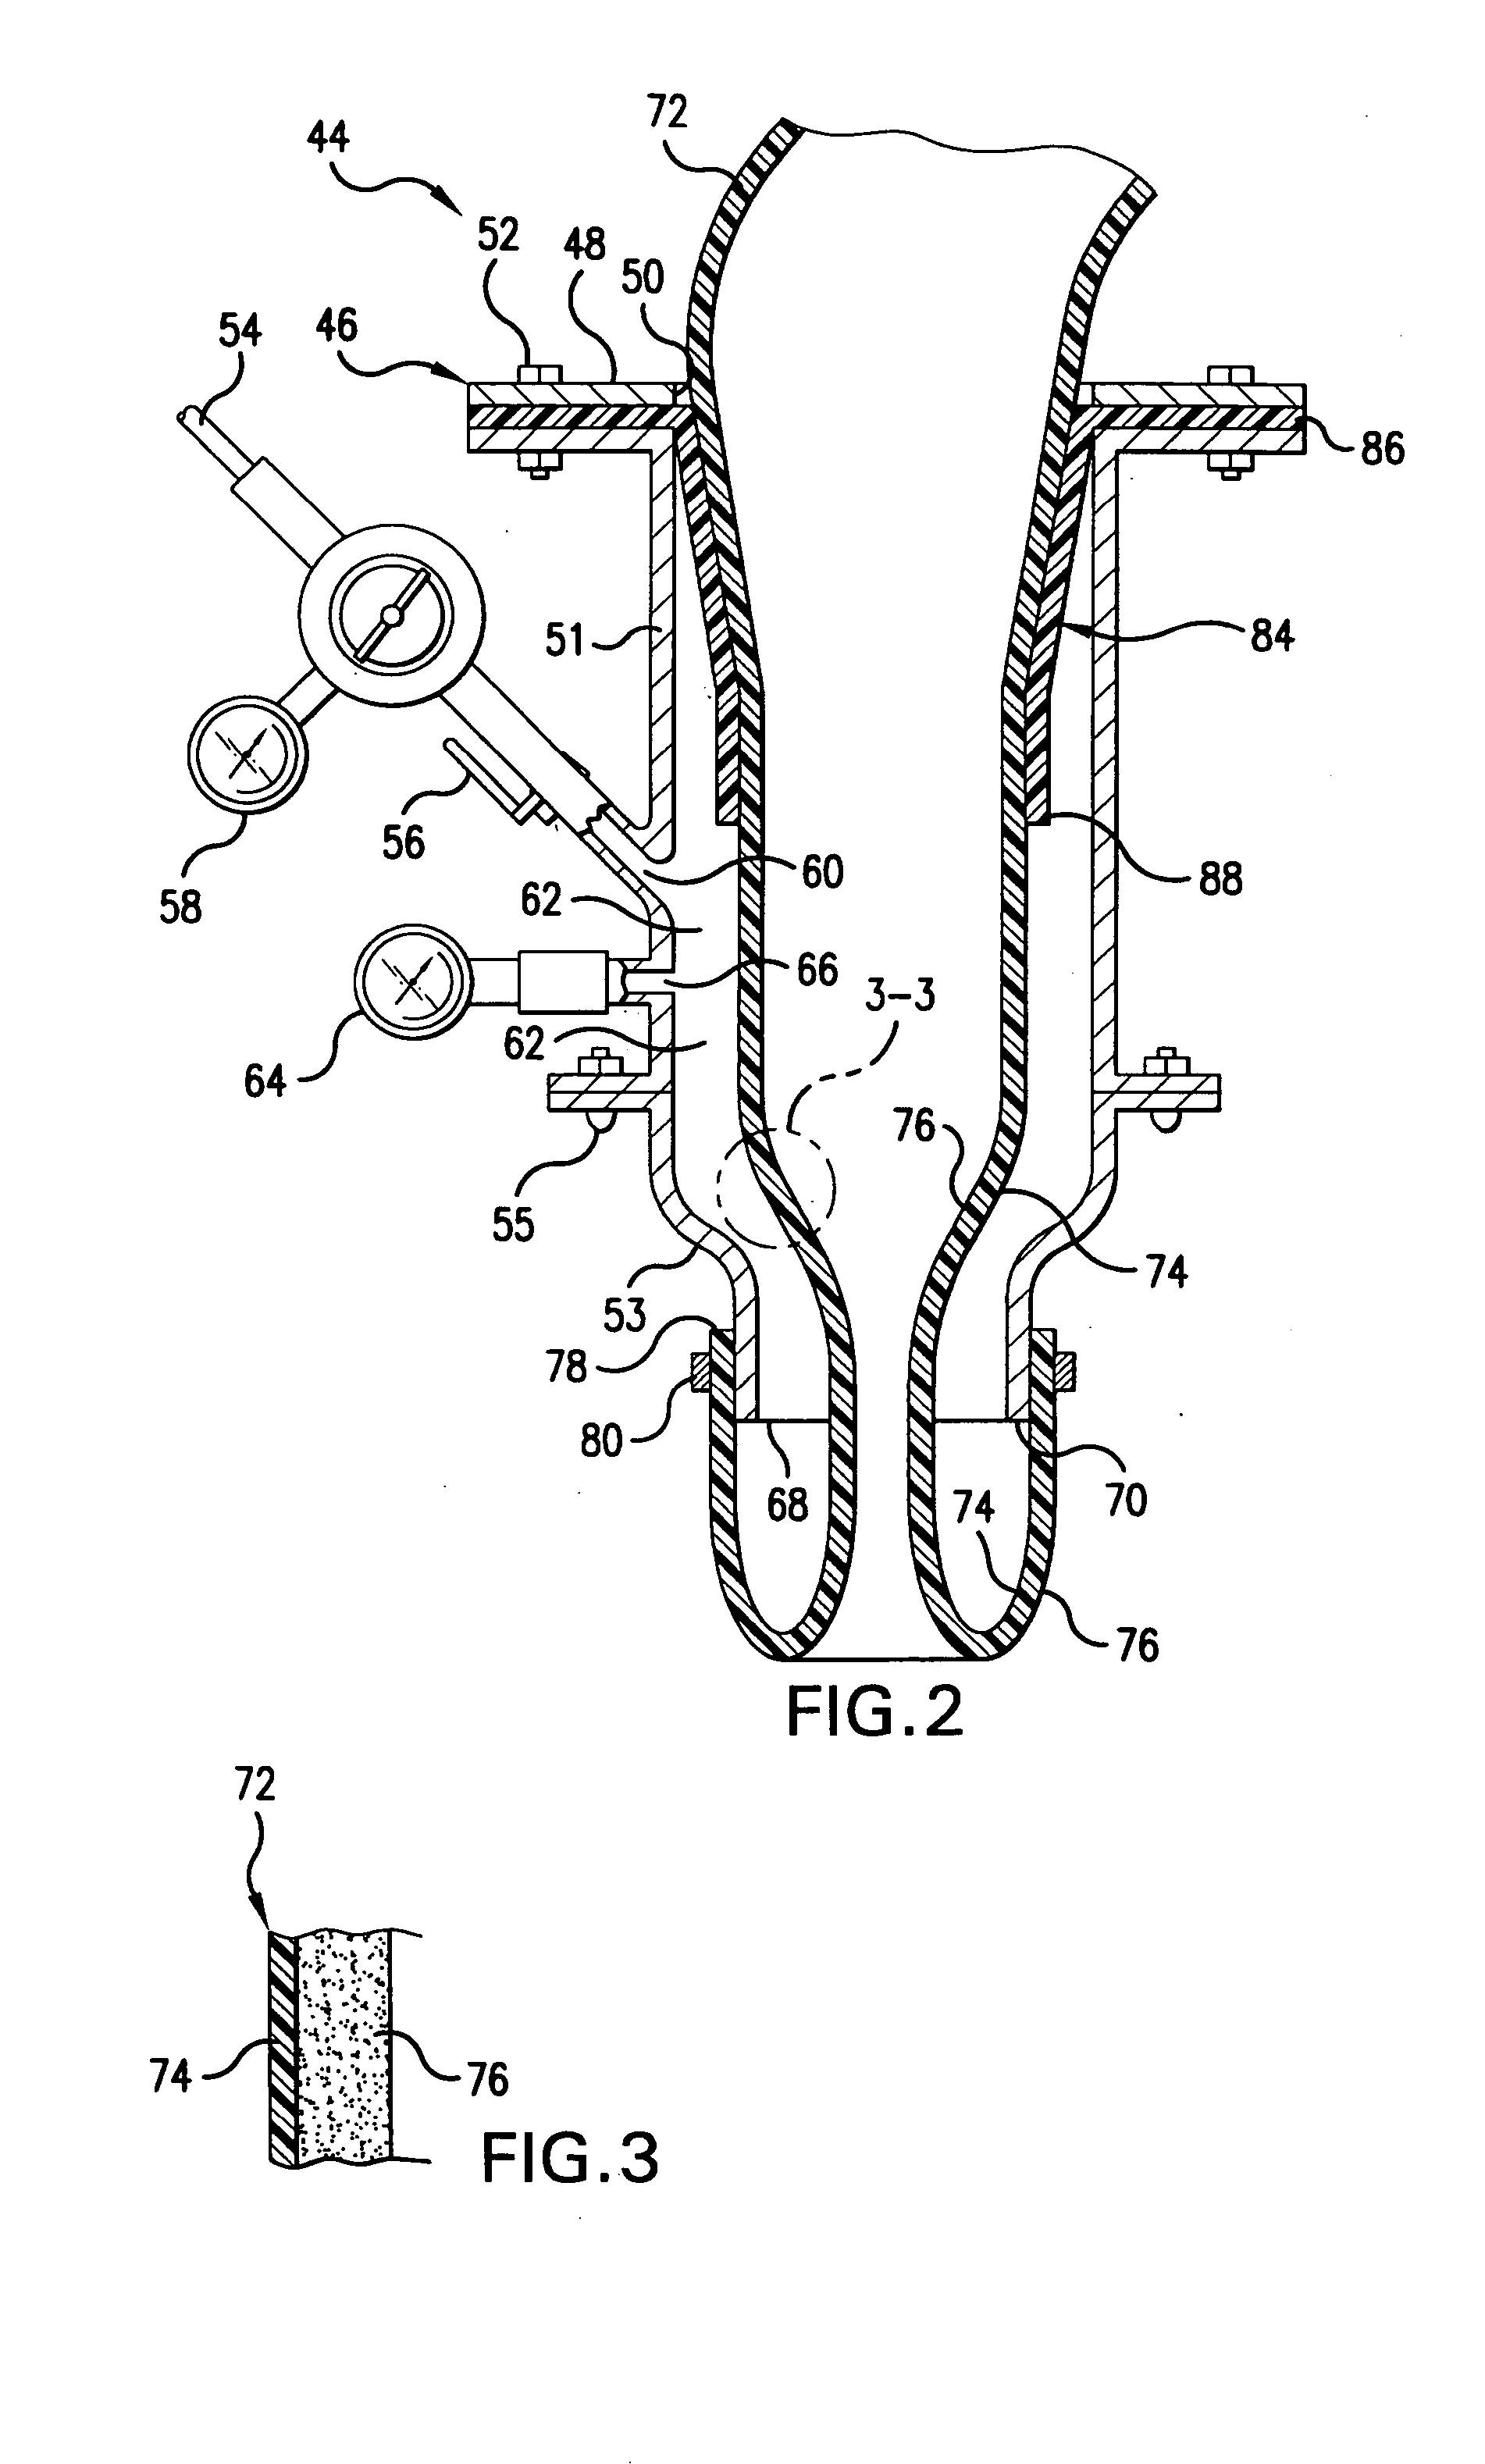 Tube inverting device and method for using same